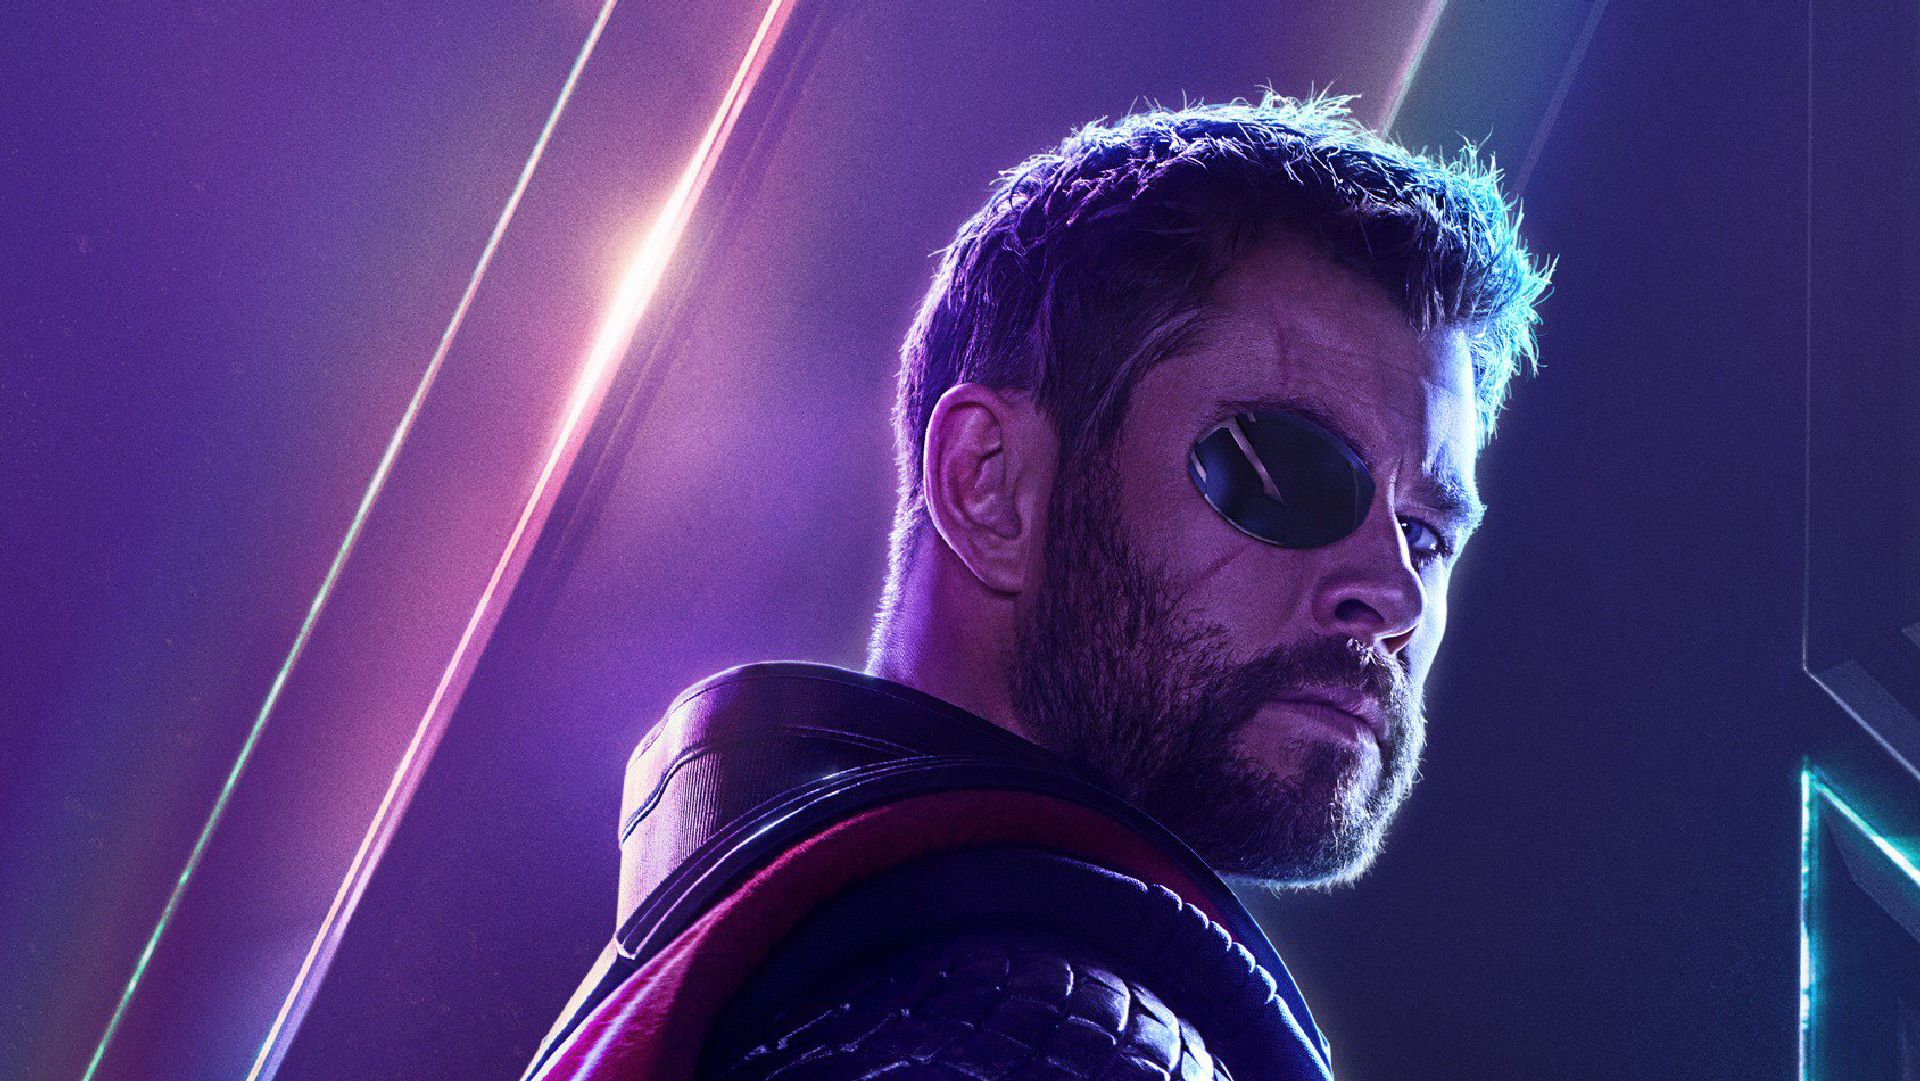 Thor In Avengers Infinity War New Poster, HD Movies, 4k Wallpaper, Image, Background, Photo and Picture